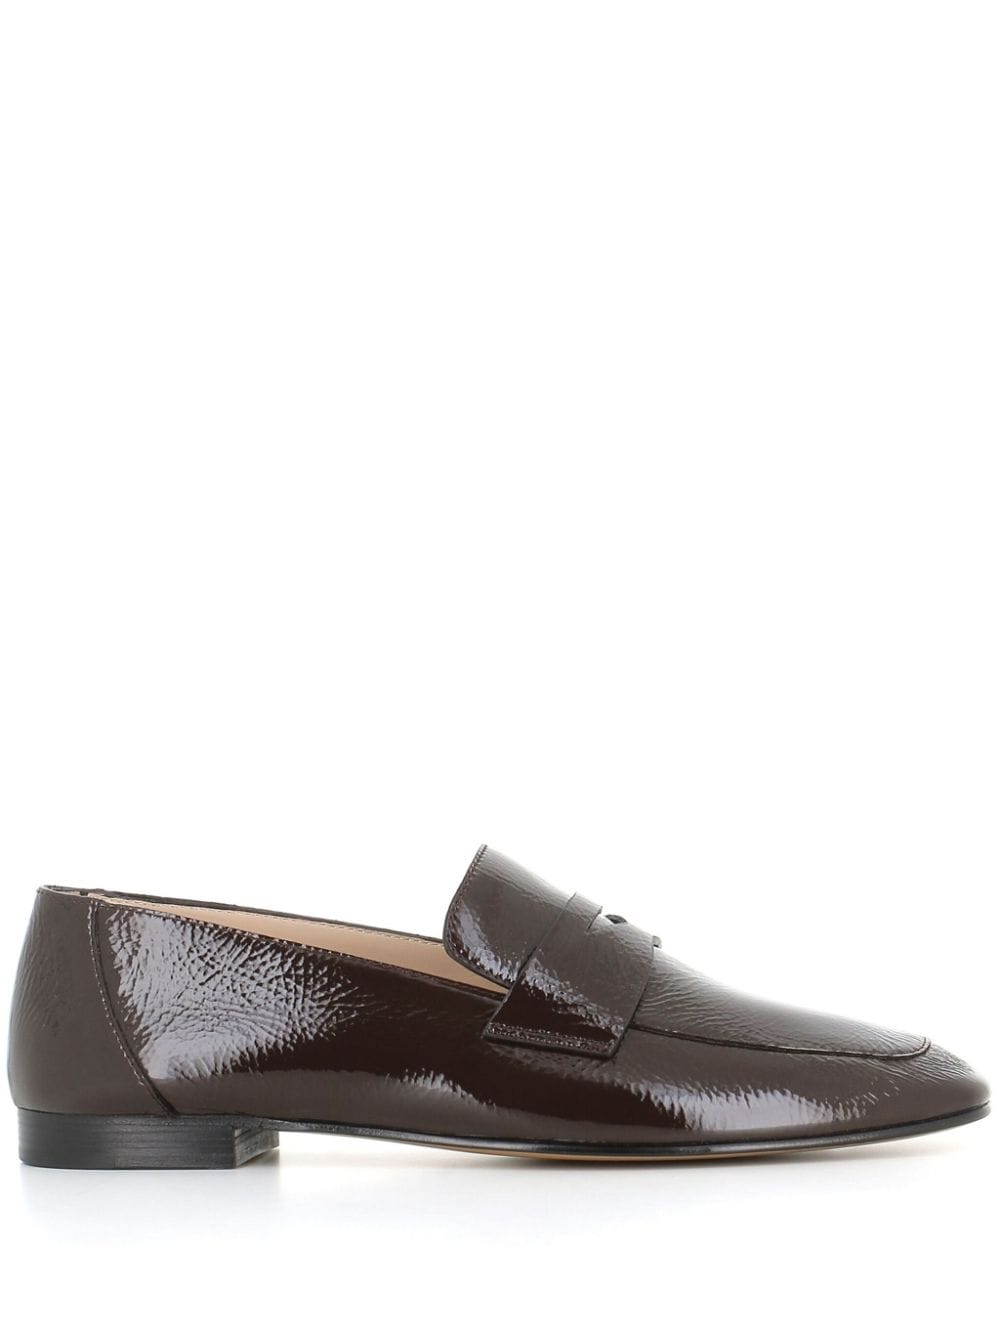 Shop Le Monde Beryl Penny-slot Patent-leather Loafers In Brown